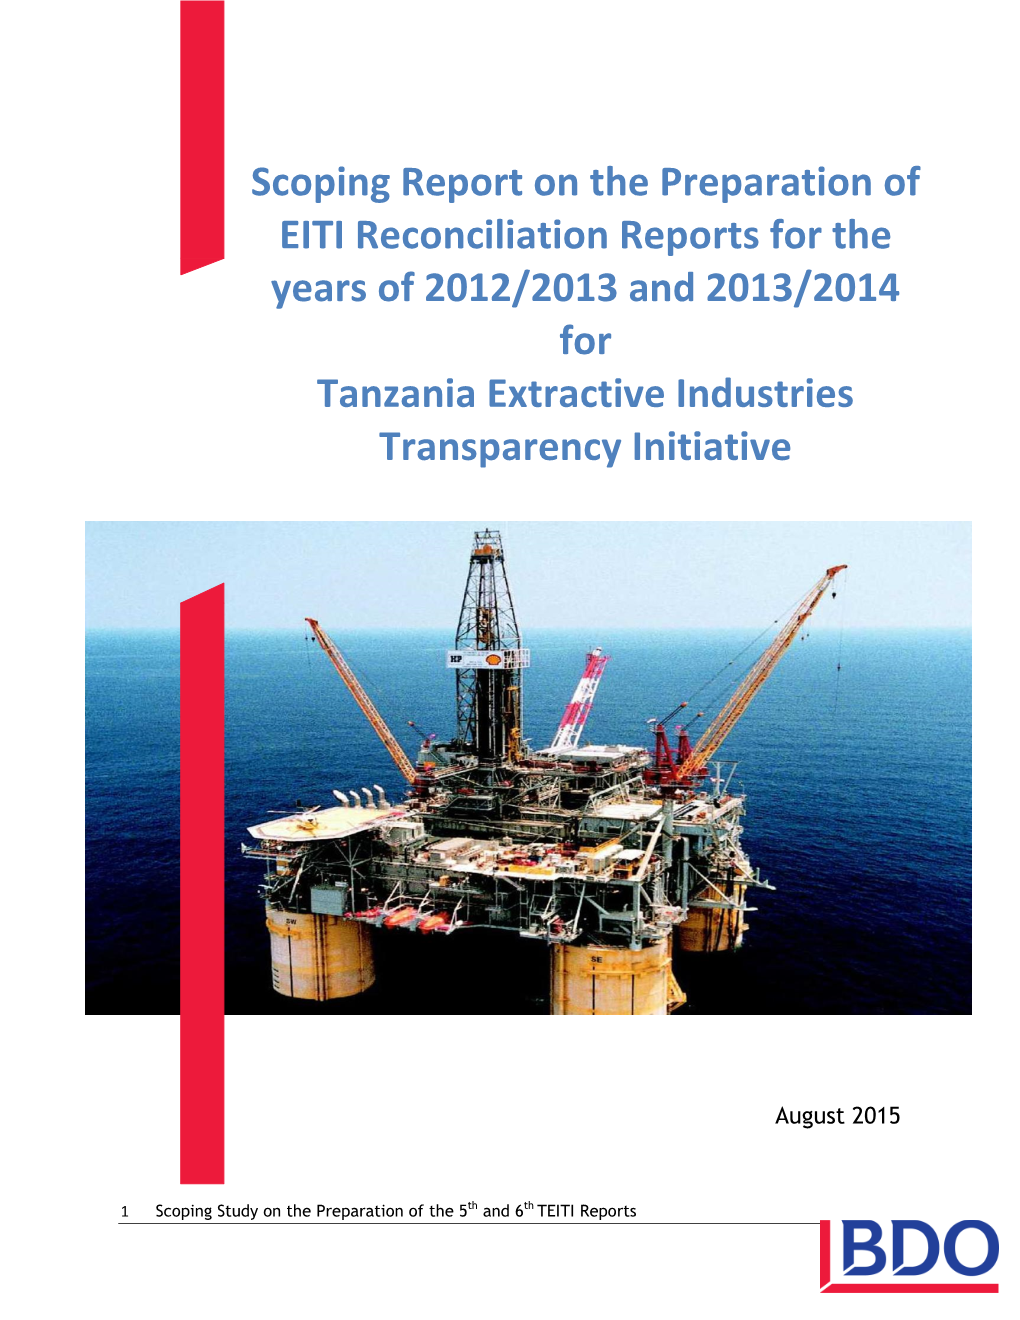 Scoping Report on the Preparation of EITI Reconciliation Reports for the Years of 2012/2013 and 2013/2014 for Tanzania Extracti